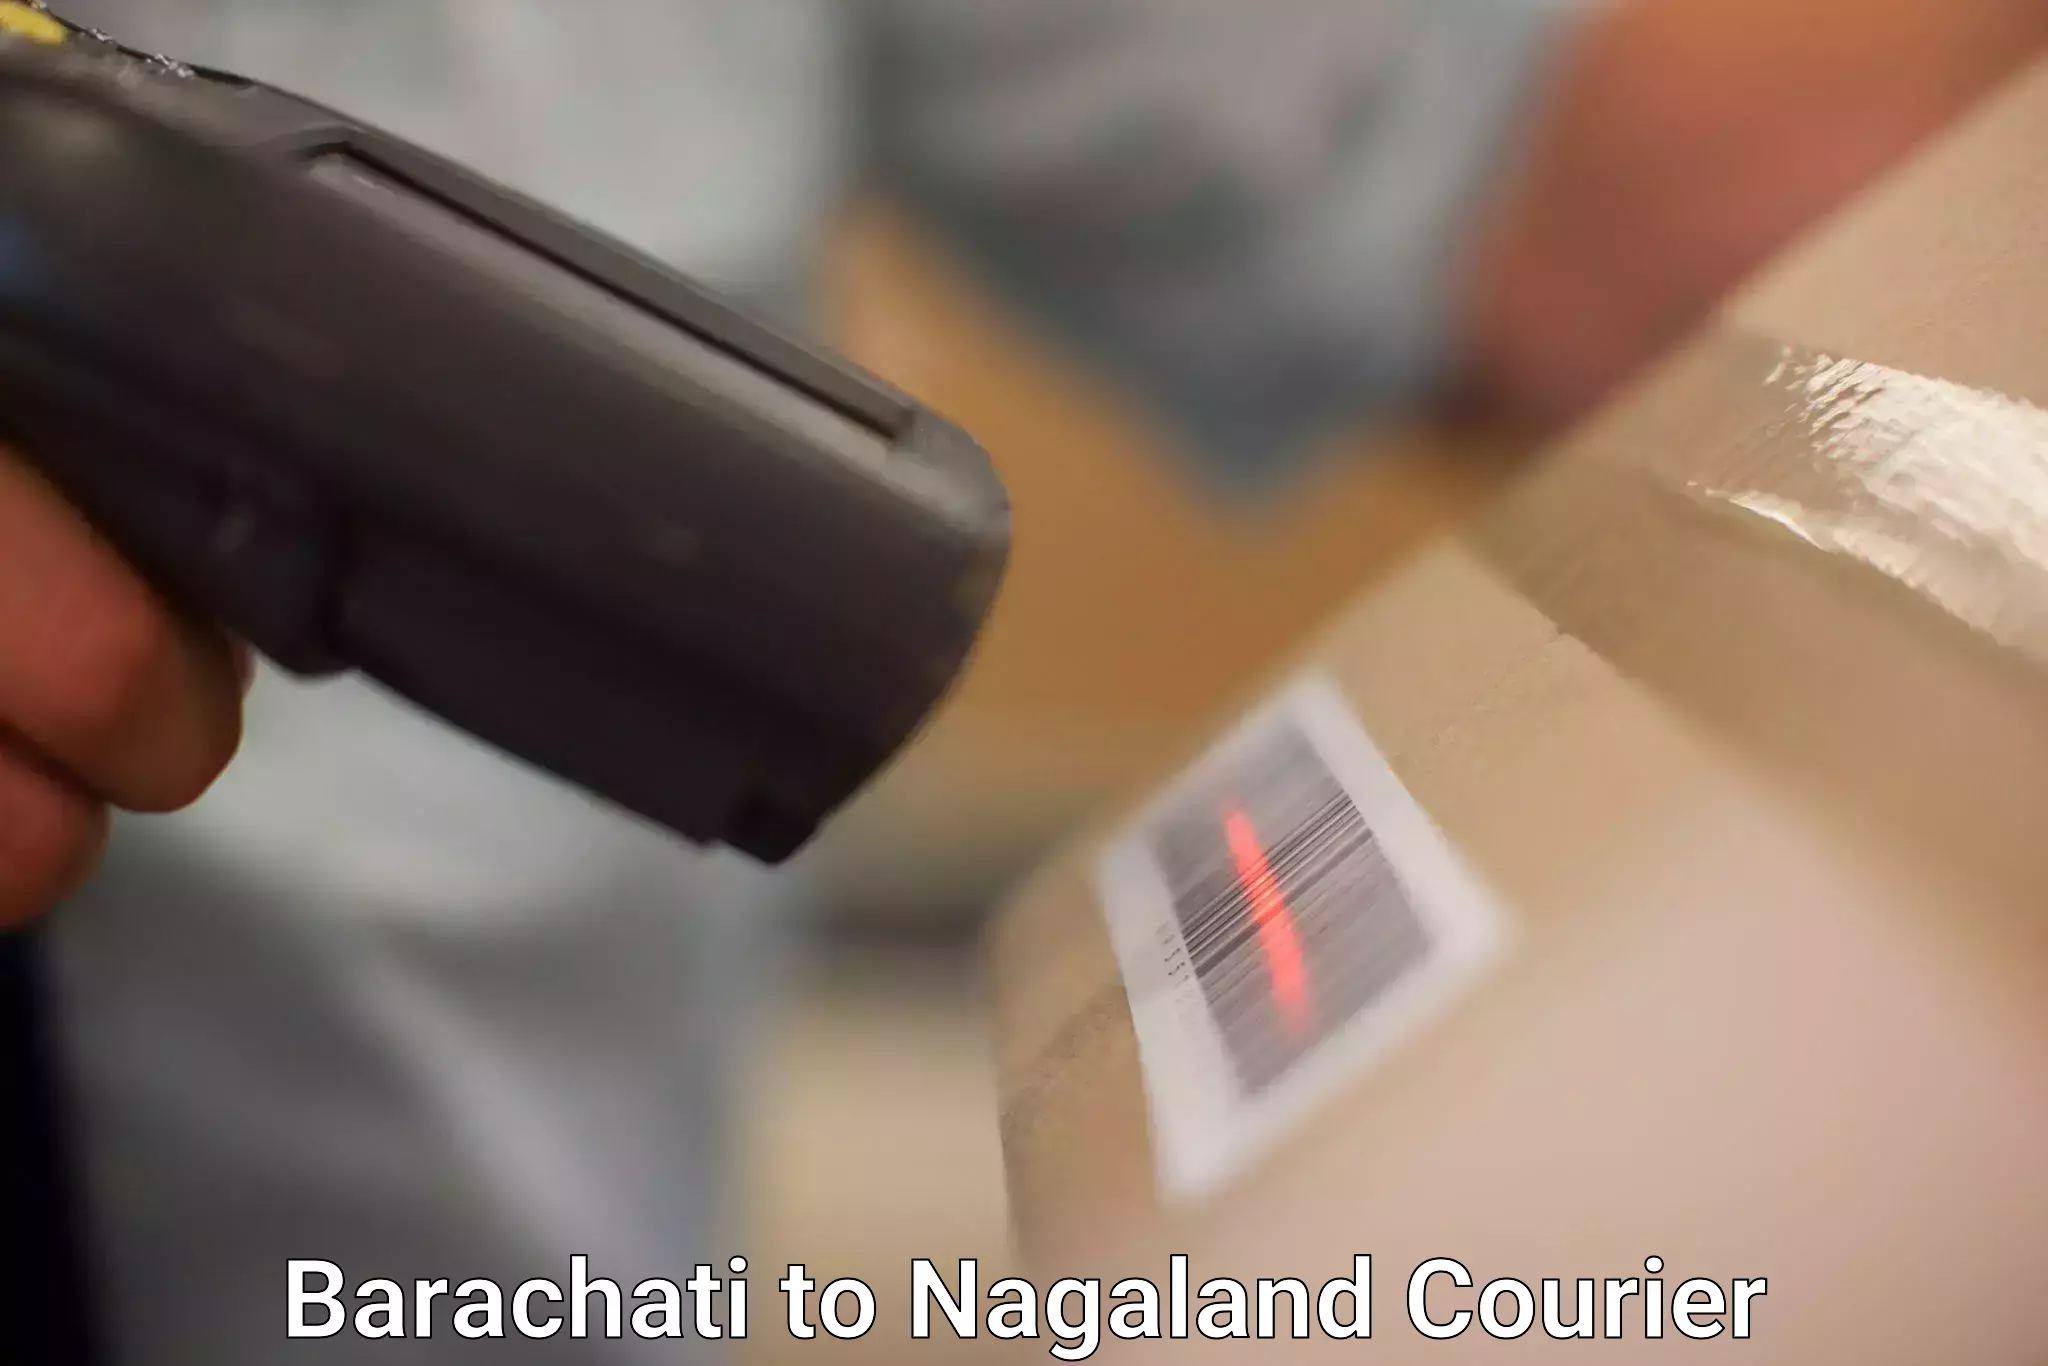 Next-day delivery options Barachati to Mon